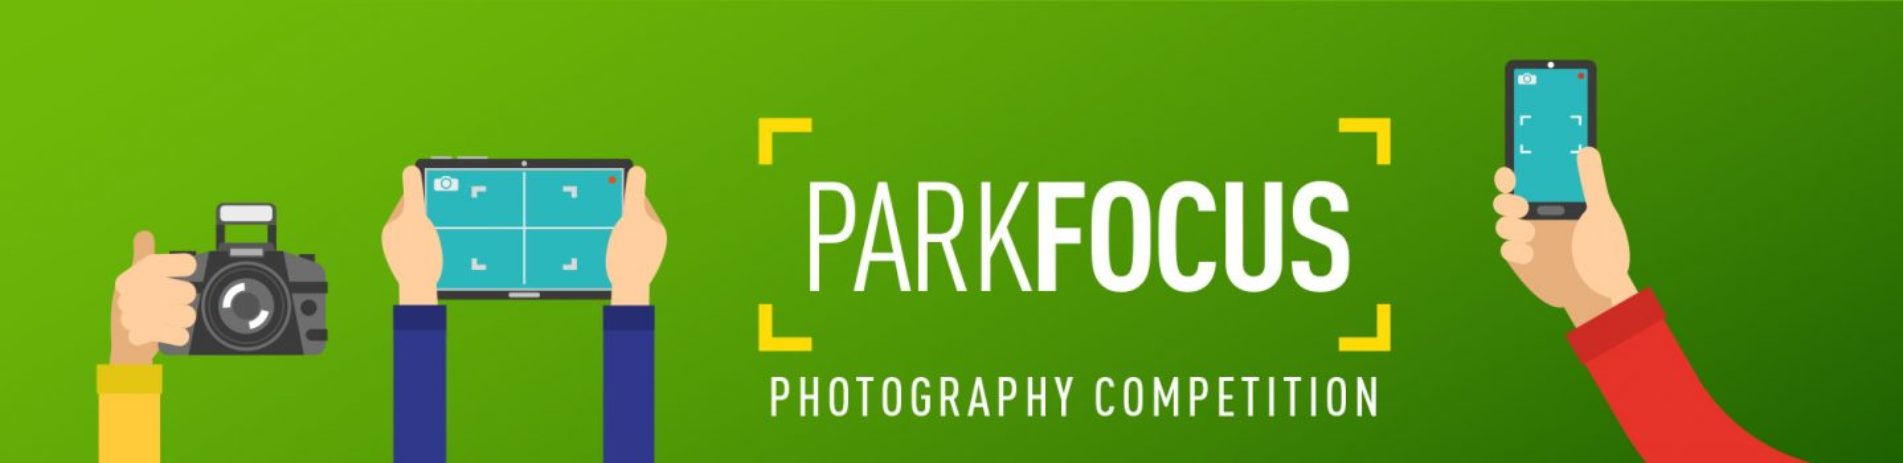 park-focus-photo-competition-for-young-people-banner-two-hands-holding-tablet